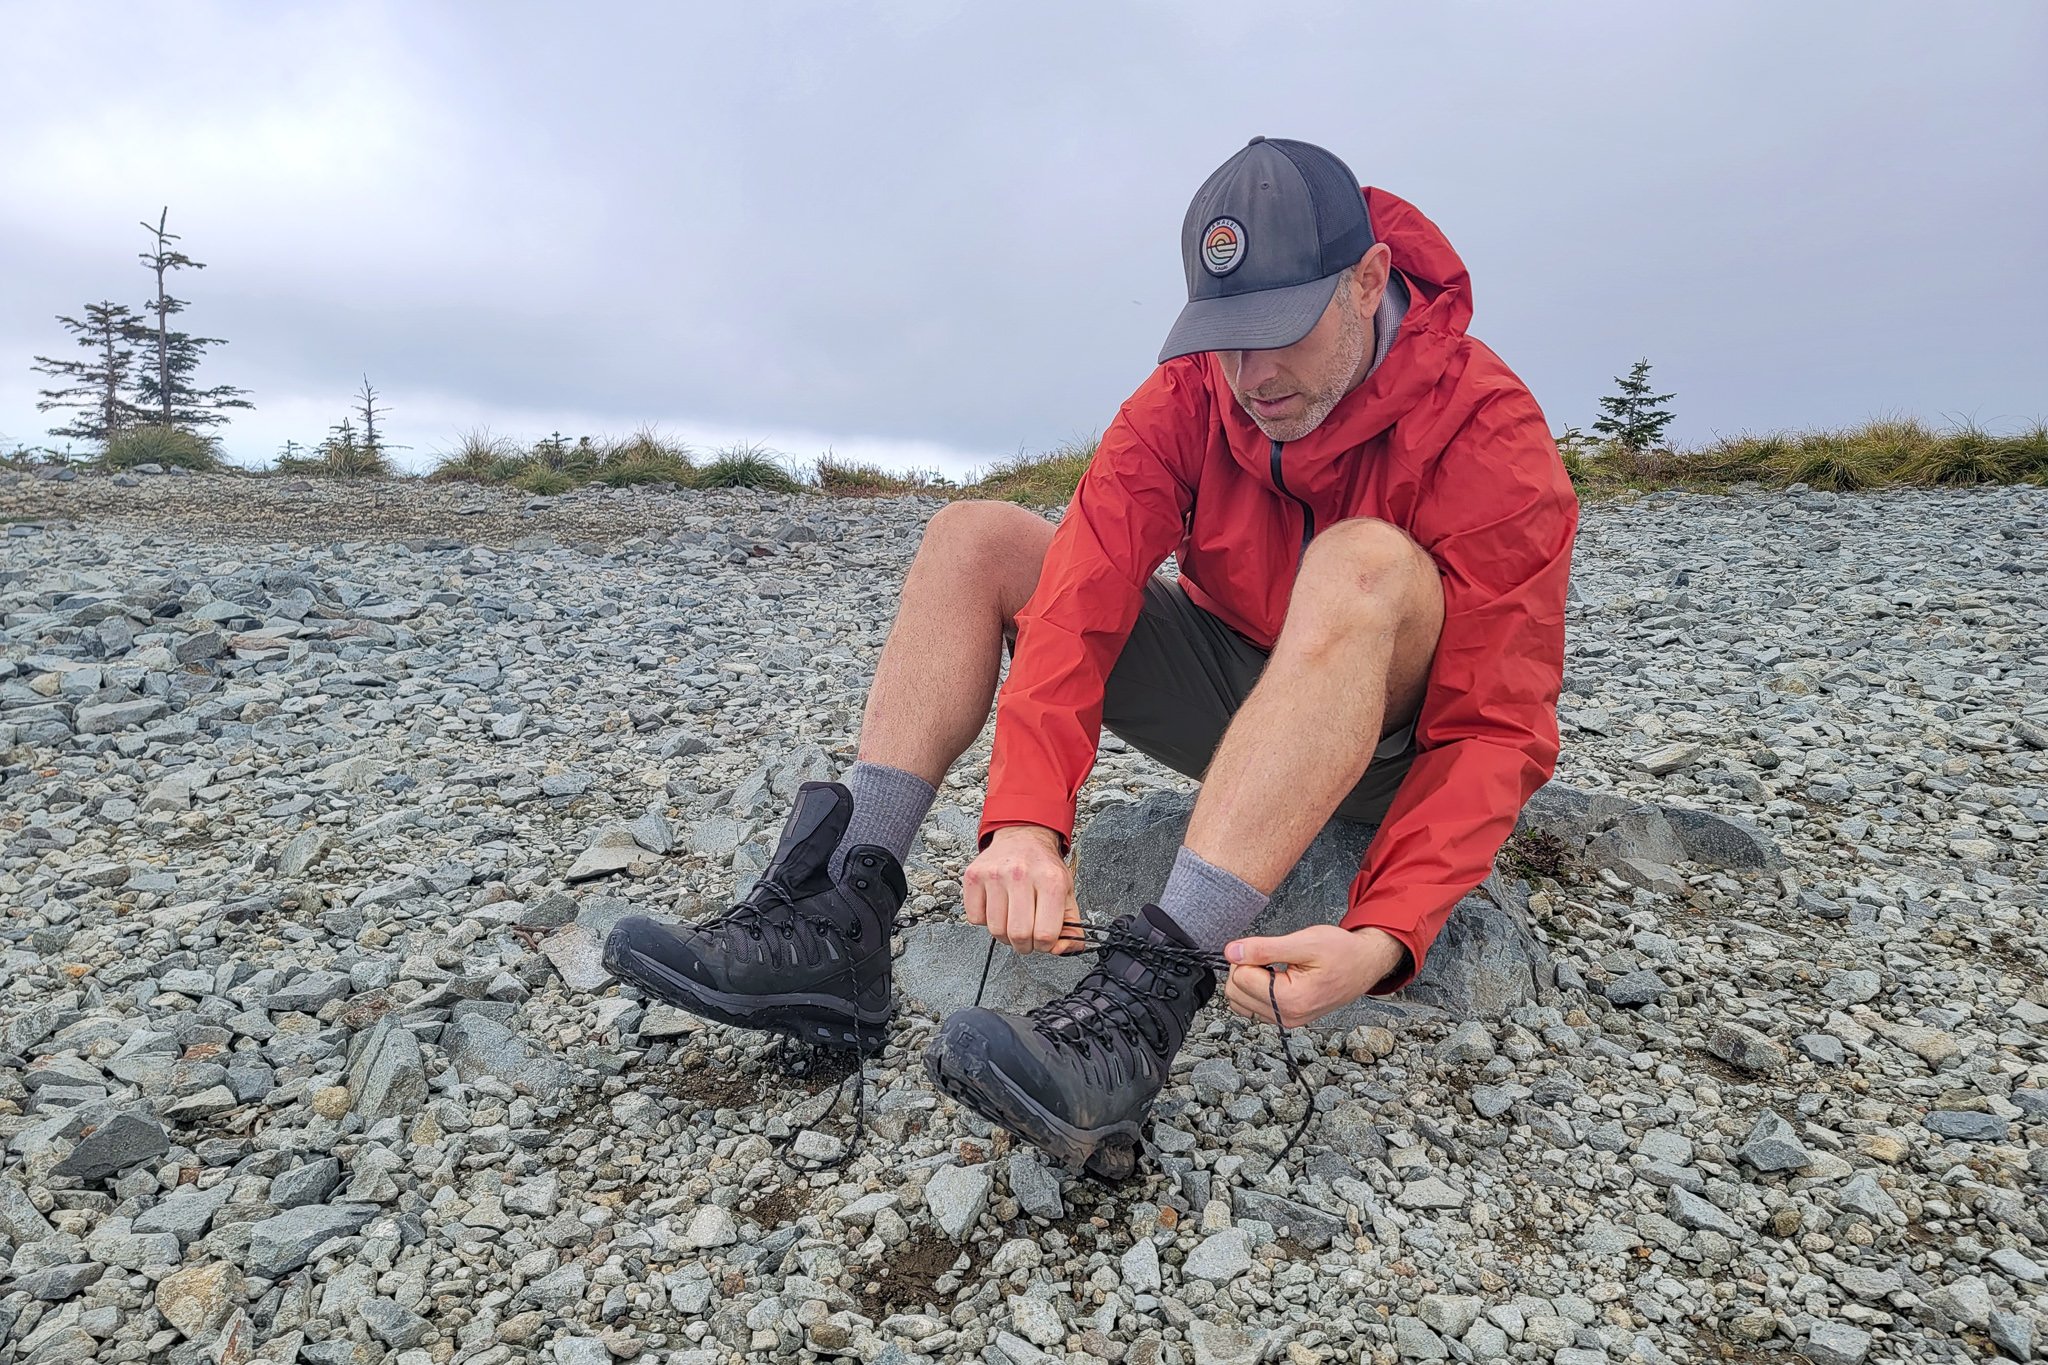 A hiker tying the Salomon Quest 4 boots